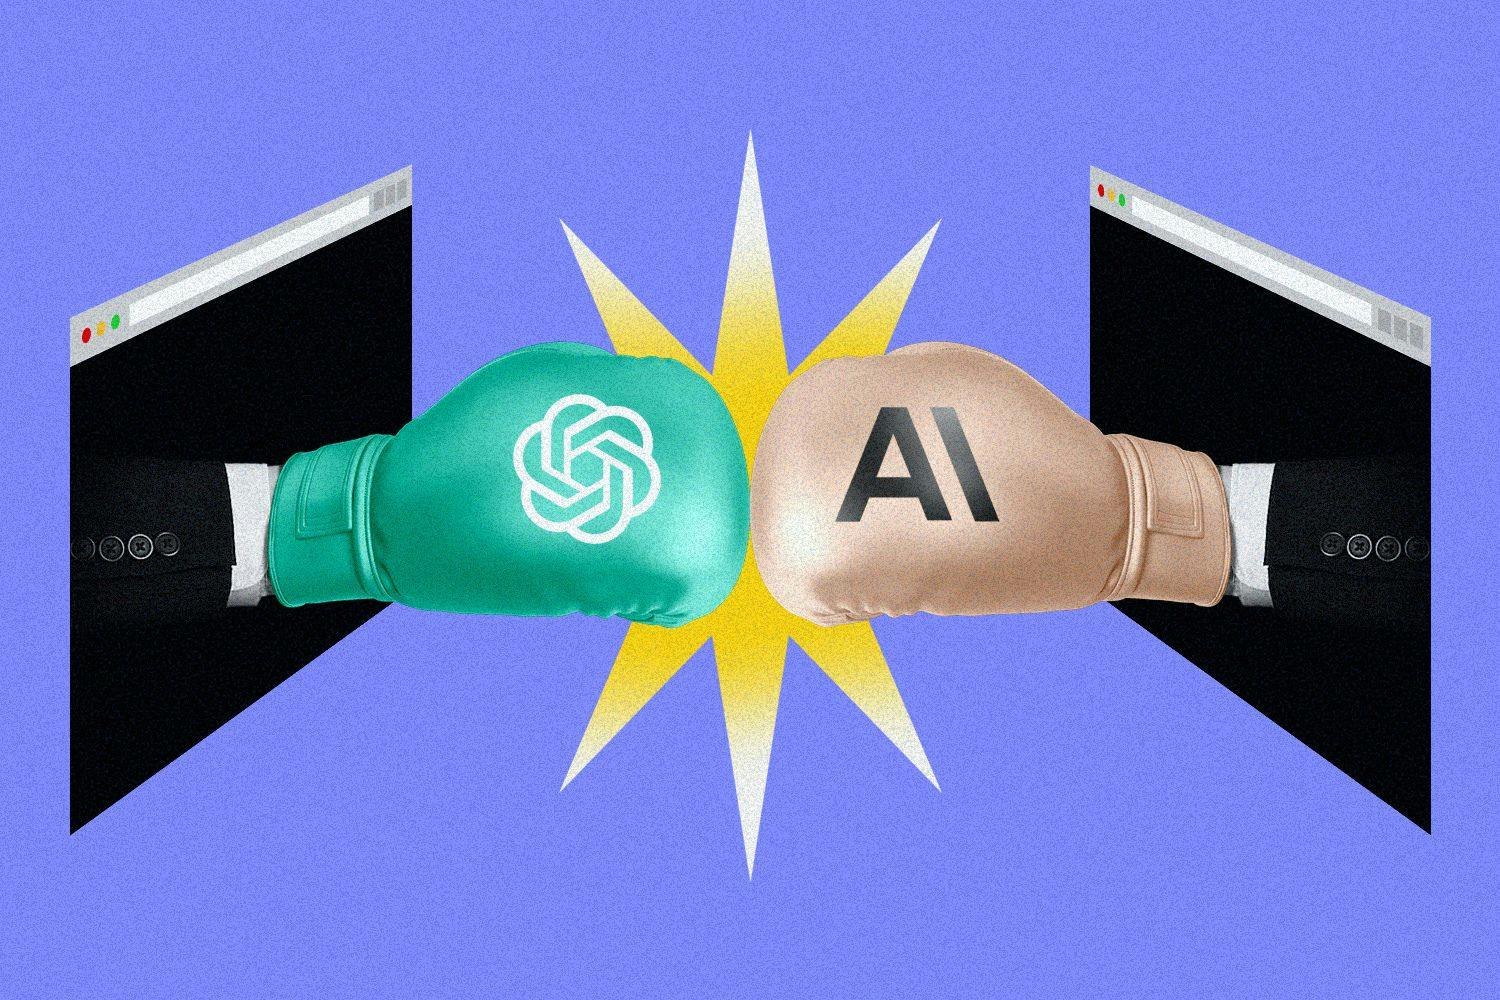 Illustration of boxing gloves featuring the Anthropic and ChatGPT logos.